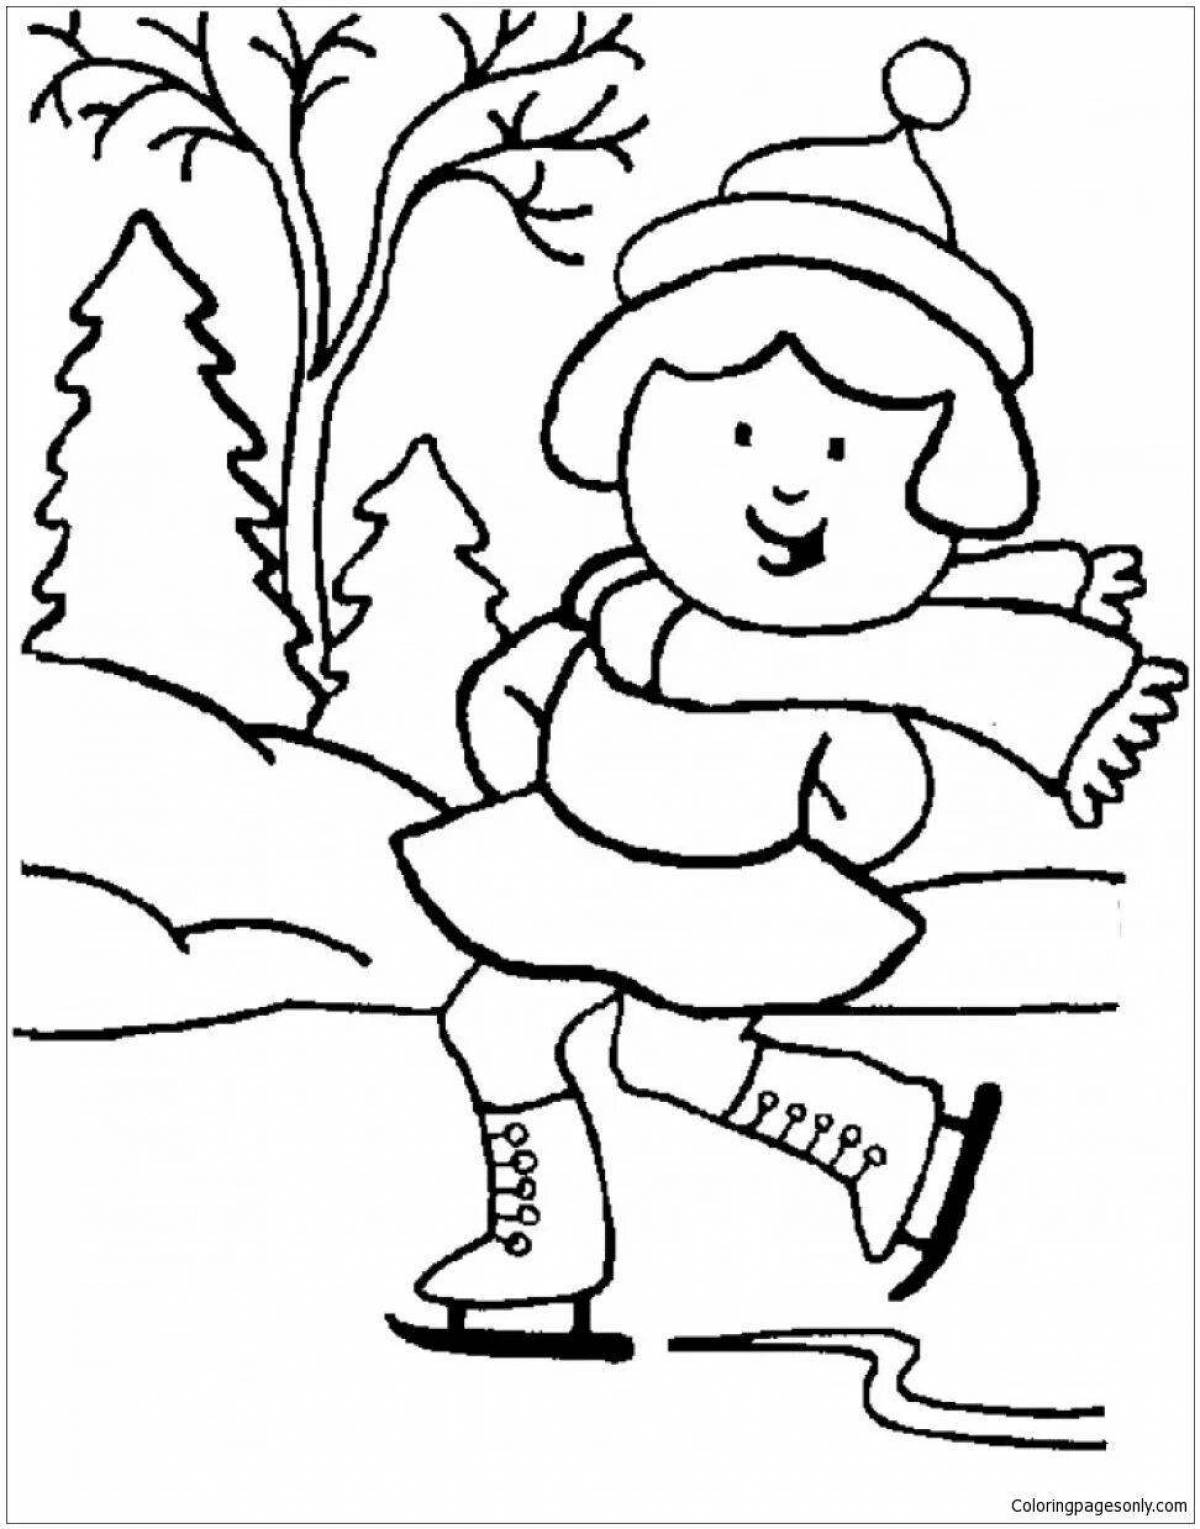 Coloured winter coloring book for younger groups